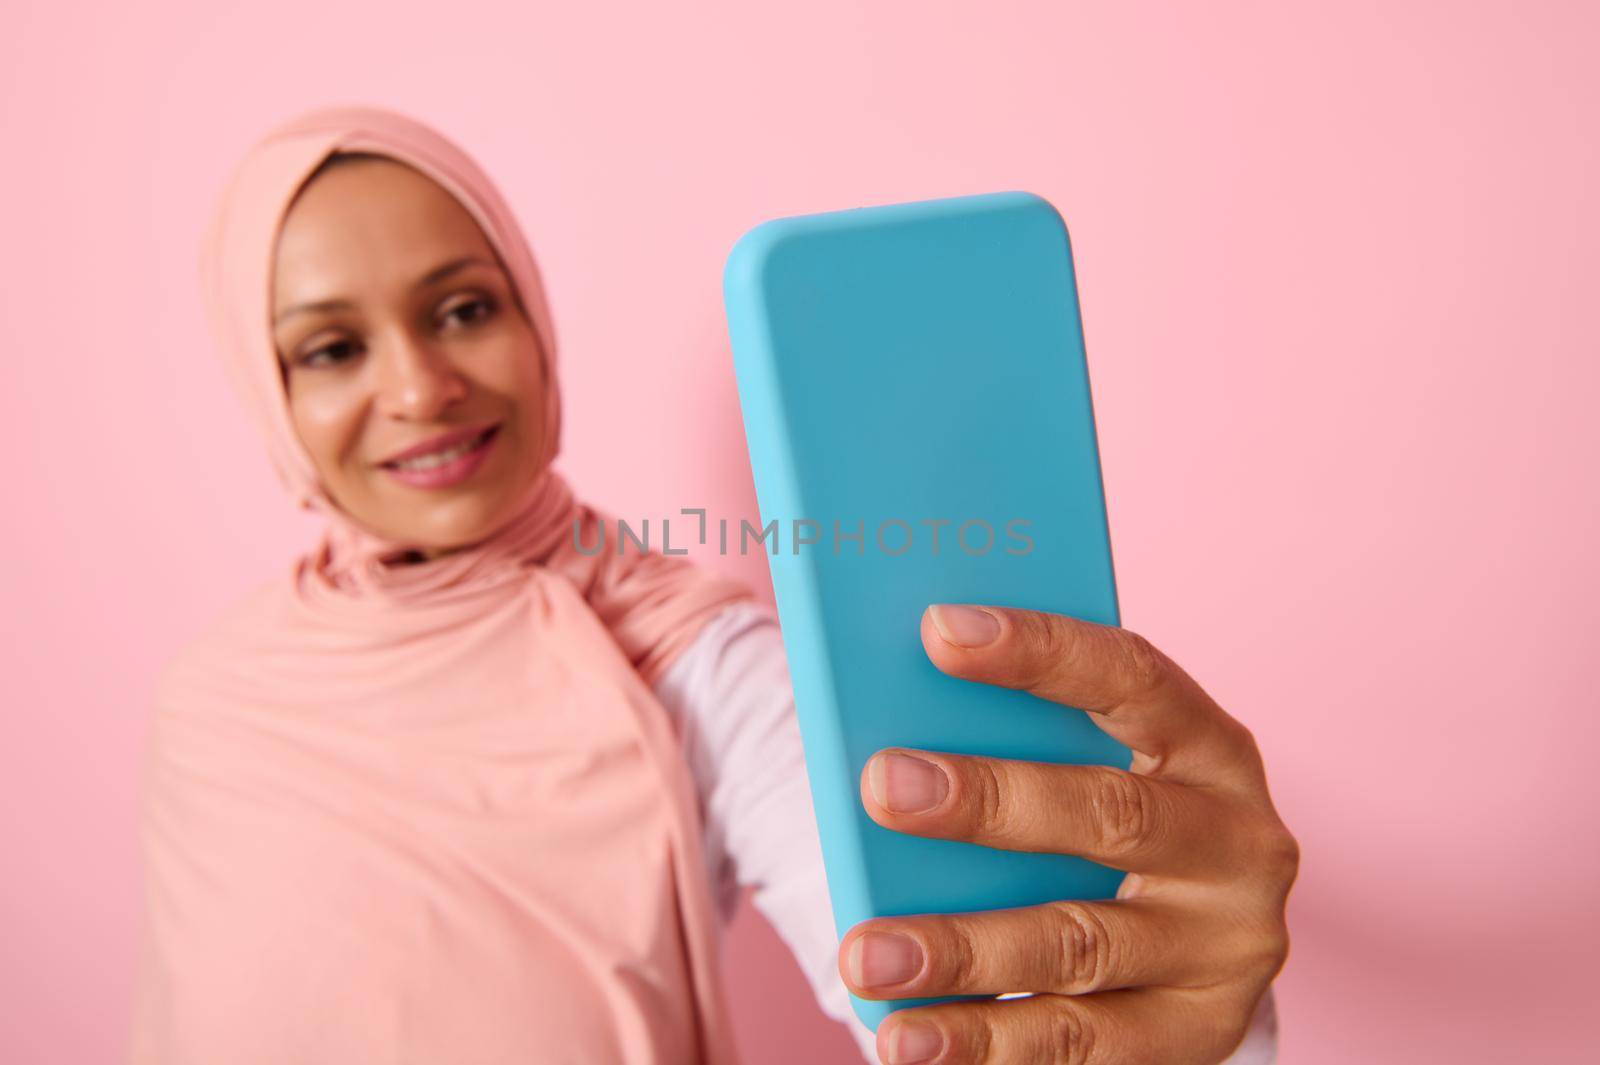 Soft focus on the smartphone in blue cover in outstretched arms of Arab Muslim woman wearing traditional religious islamic outfit, pink hijab,and smiles with toothy smile making a selfie, self-portrait